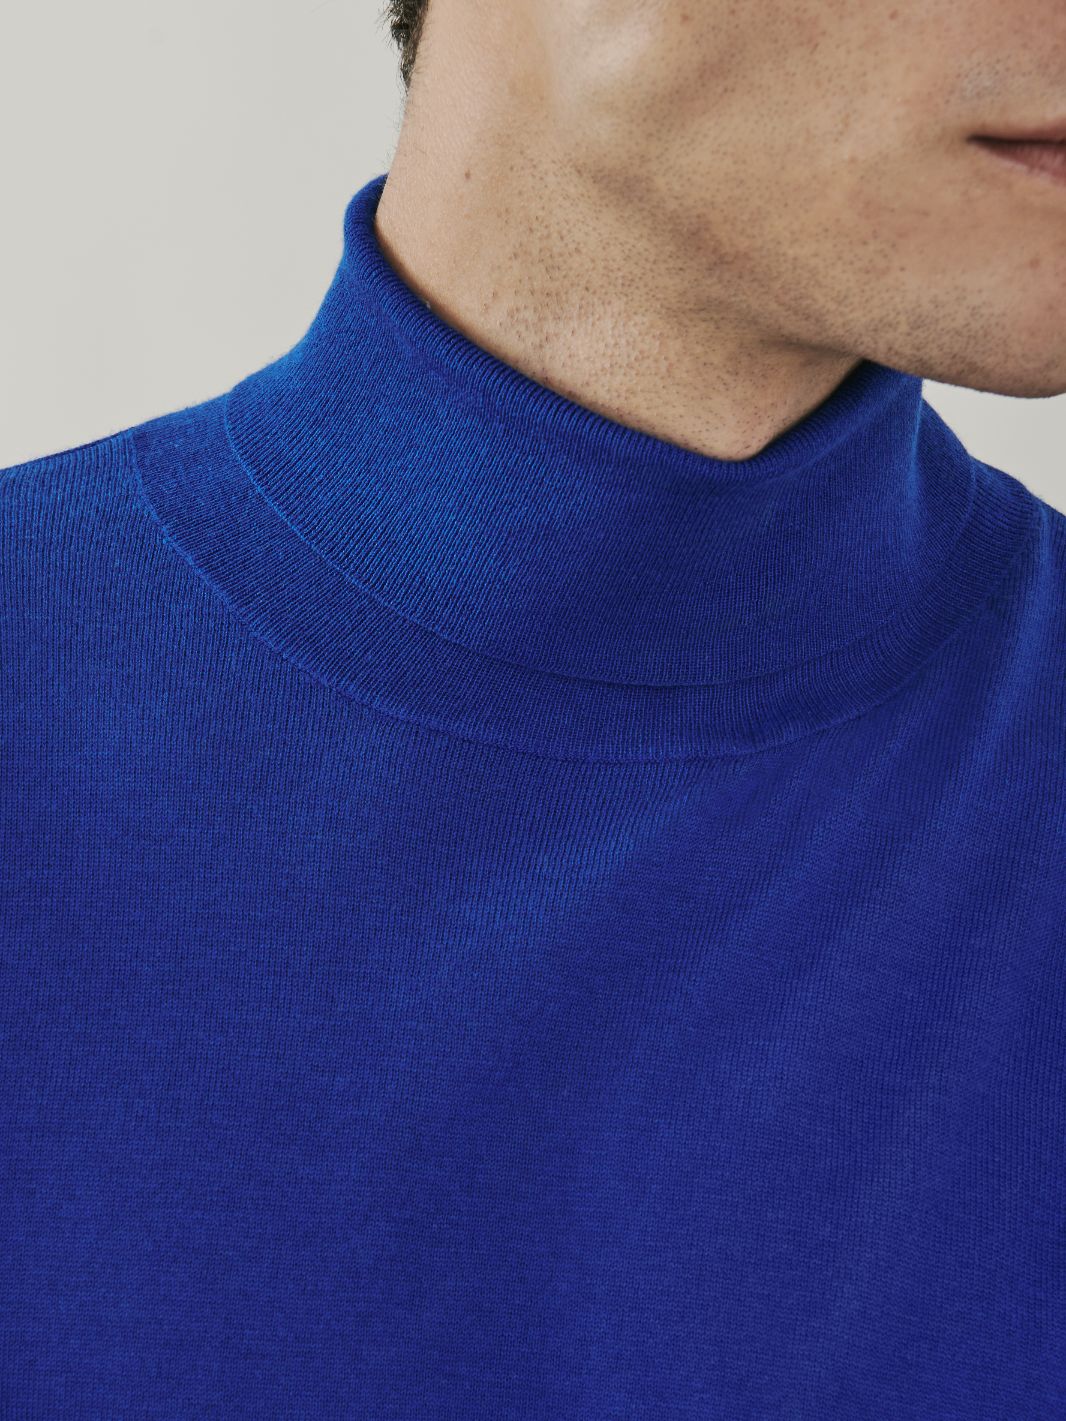 Piccadilly Silk and Cashmere Roll Neck Sweater - Royal Blue